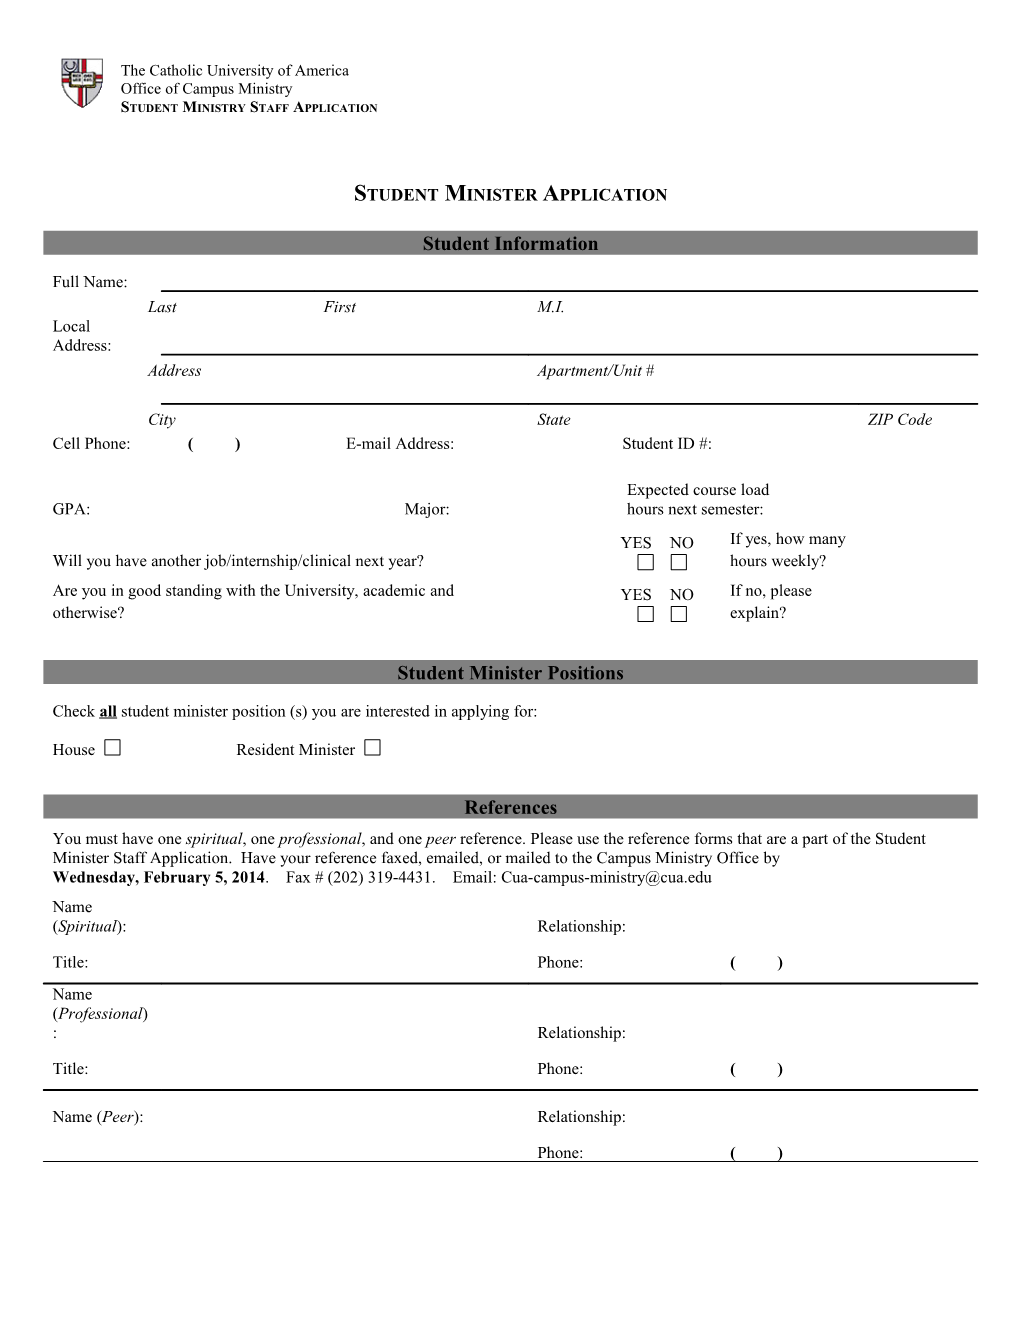 Ststudent Ministry Staff Application